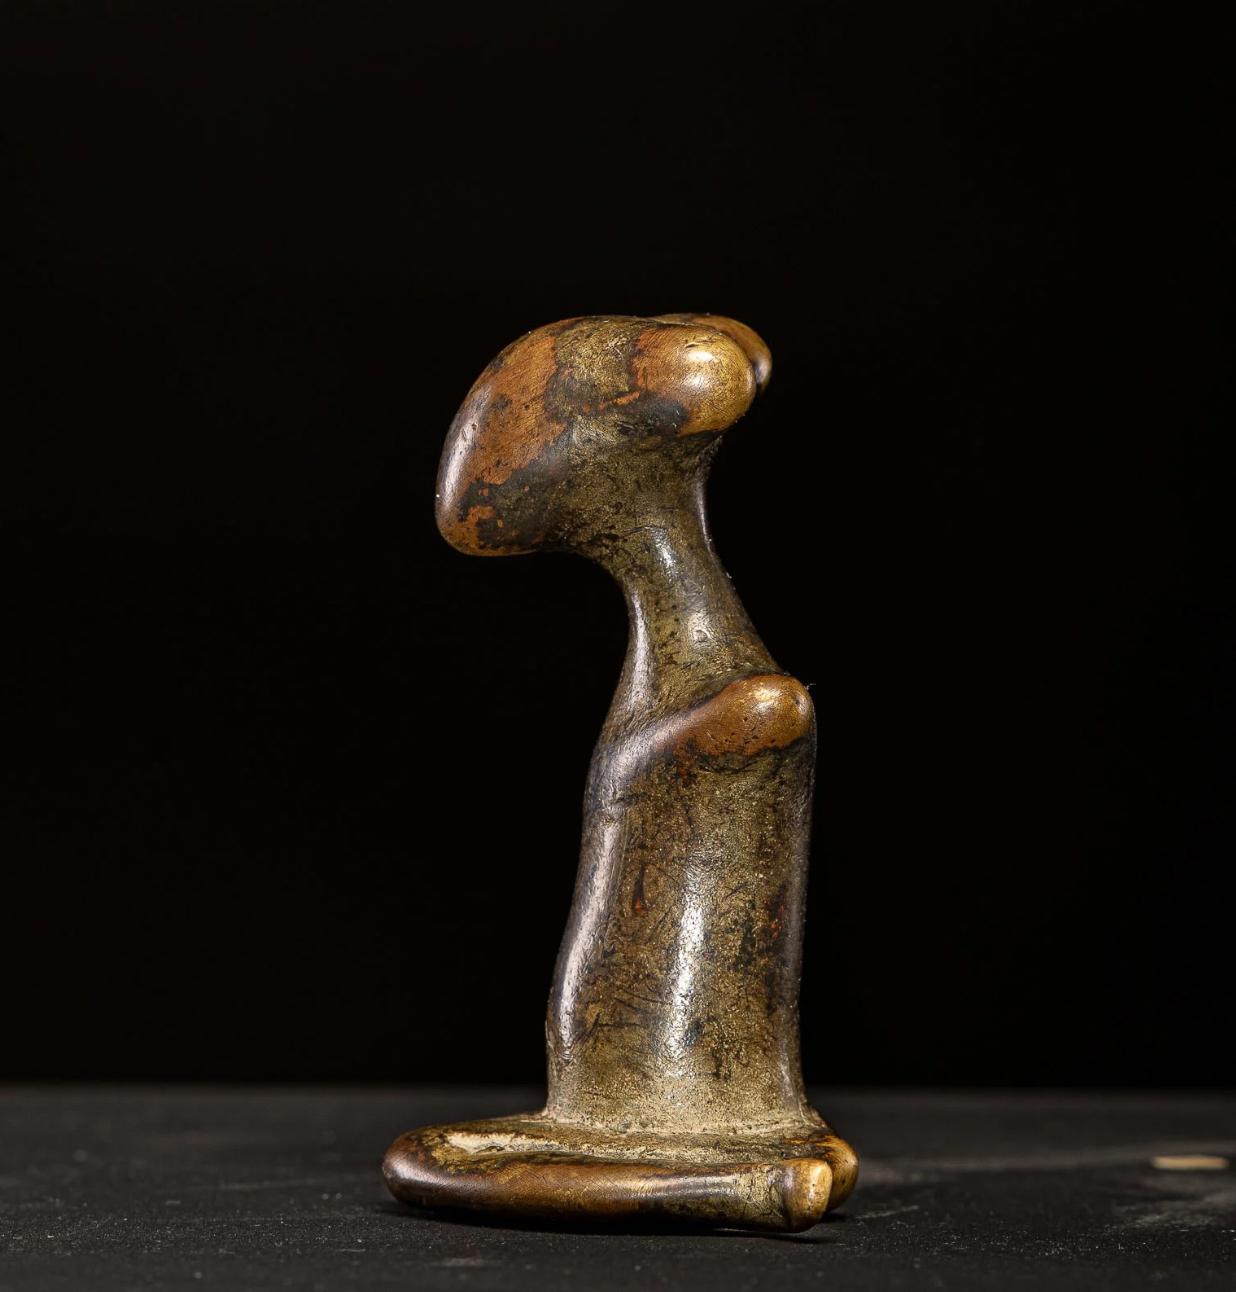 This bronze statuette of striking modernity,in a minimalist and refined style is part of an eminently small corpus. The fluidity of the forms and the remarkable purity of the figurine, characterizes the play of tension and balance of Kulango art. To